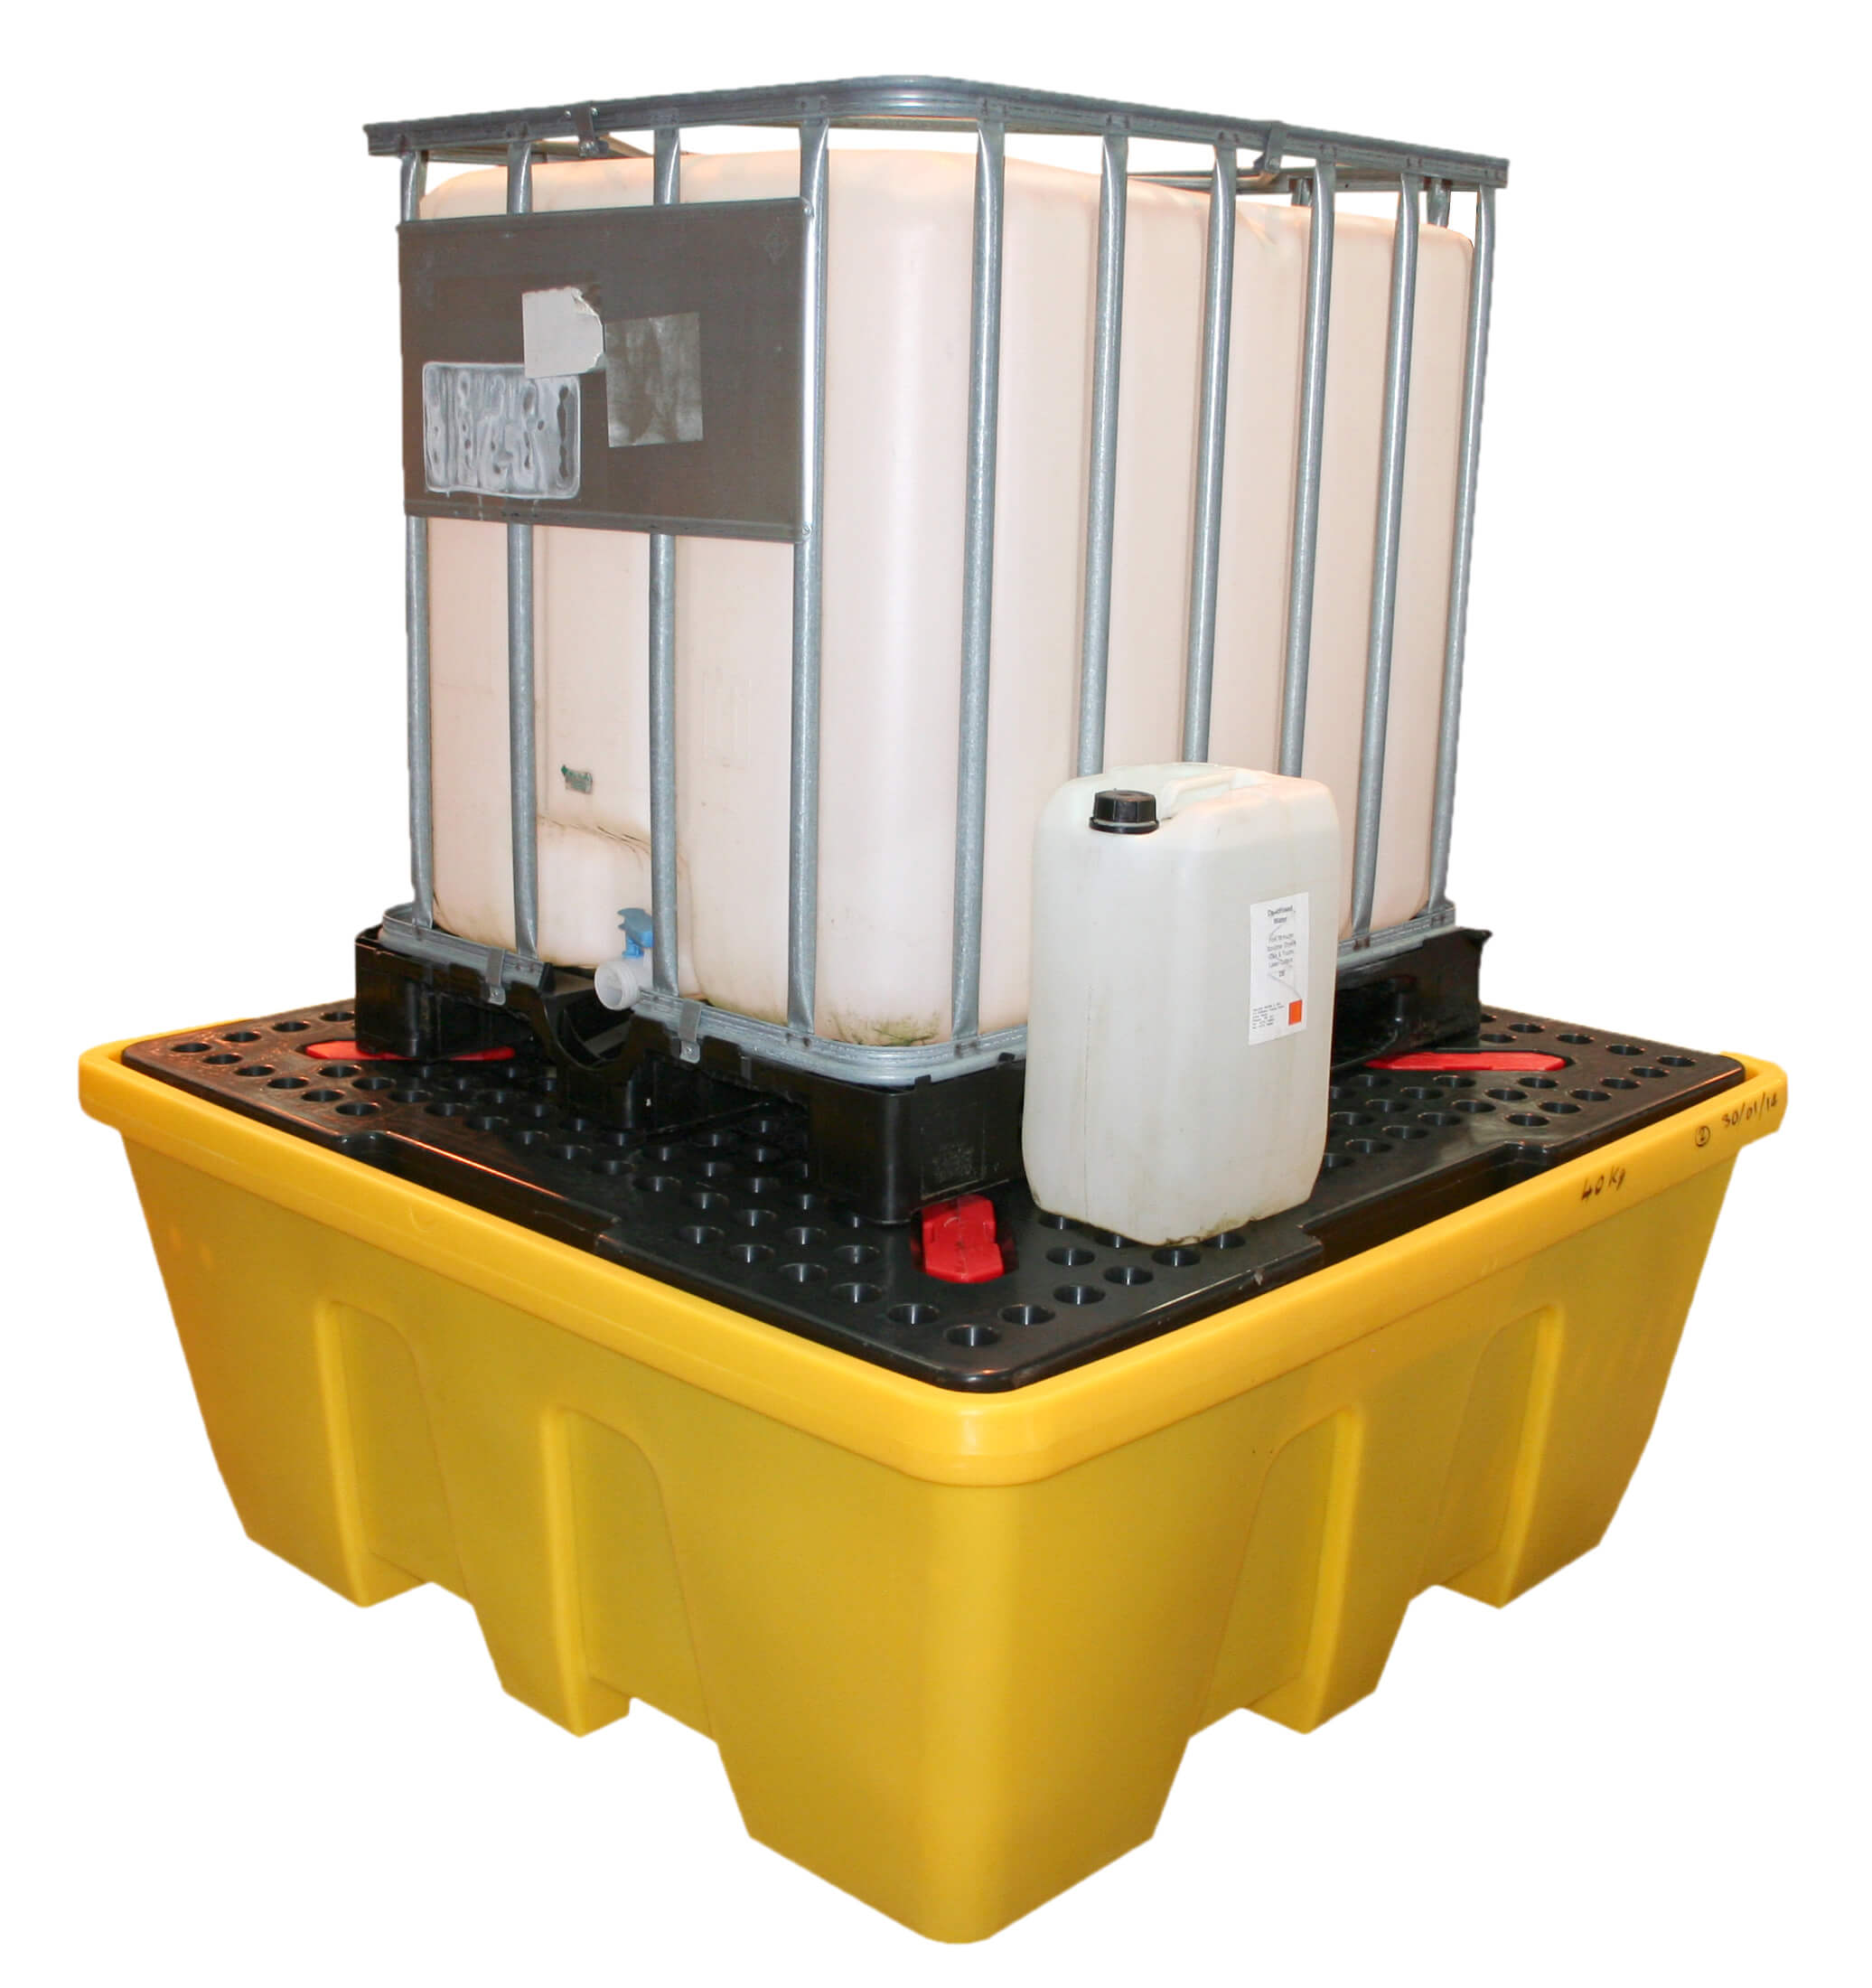 IBC Spillpallet with removable deck. Stackable